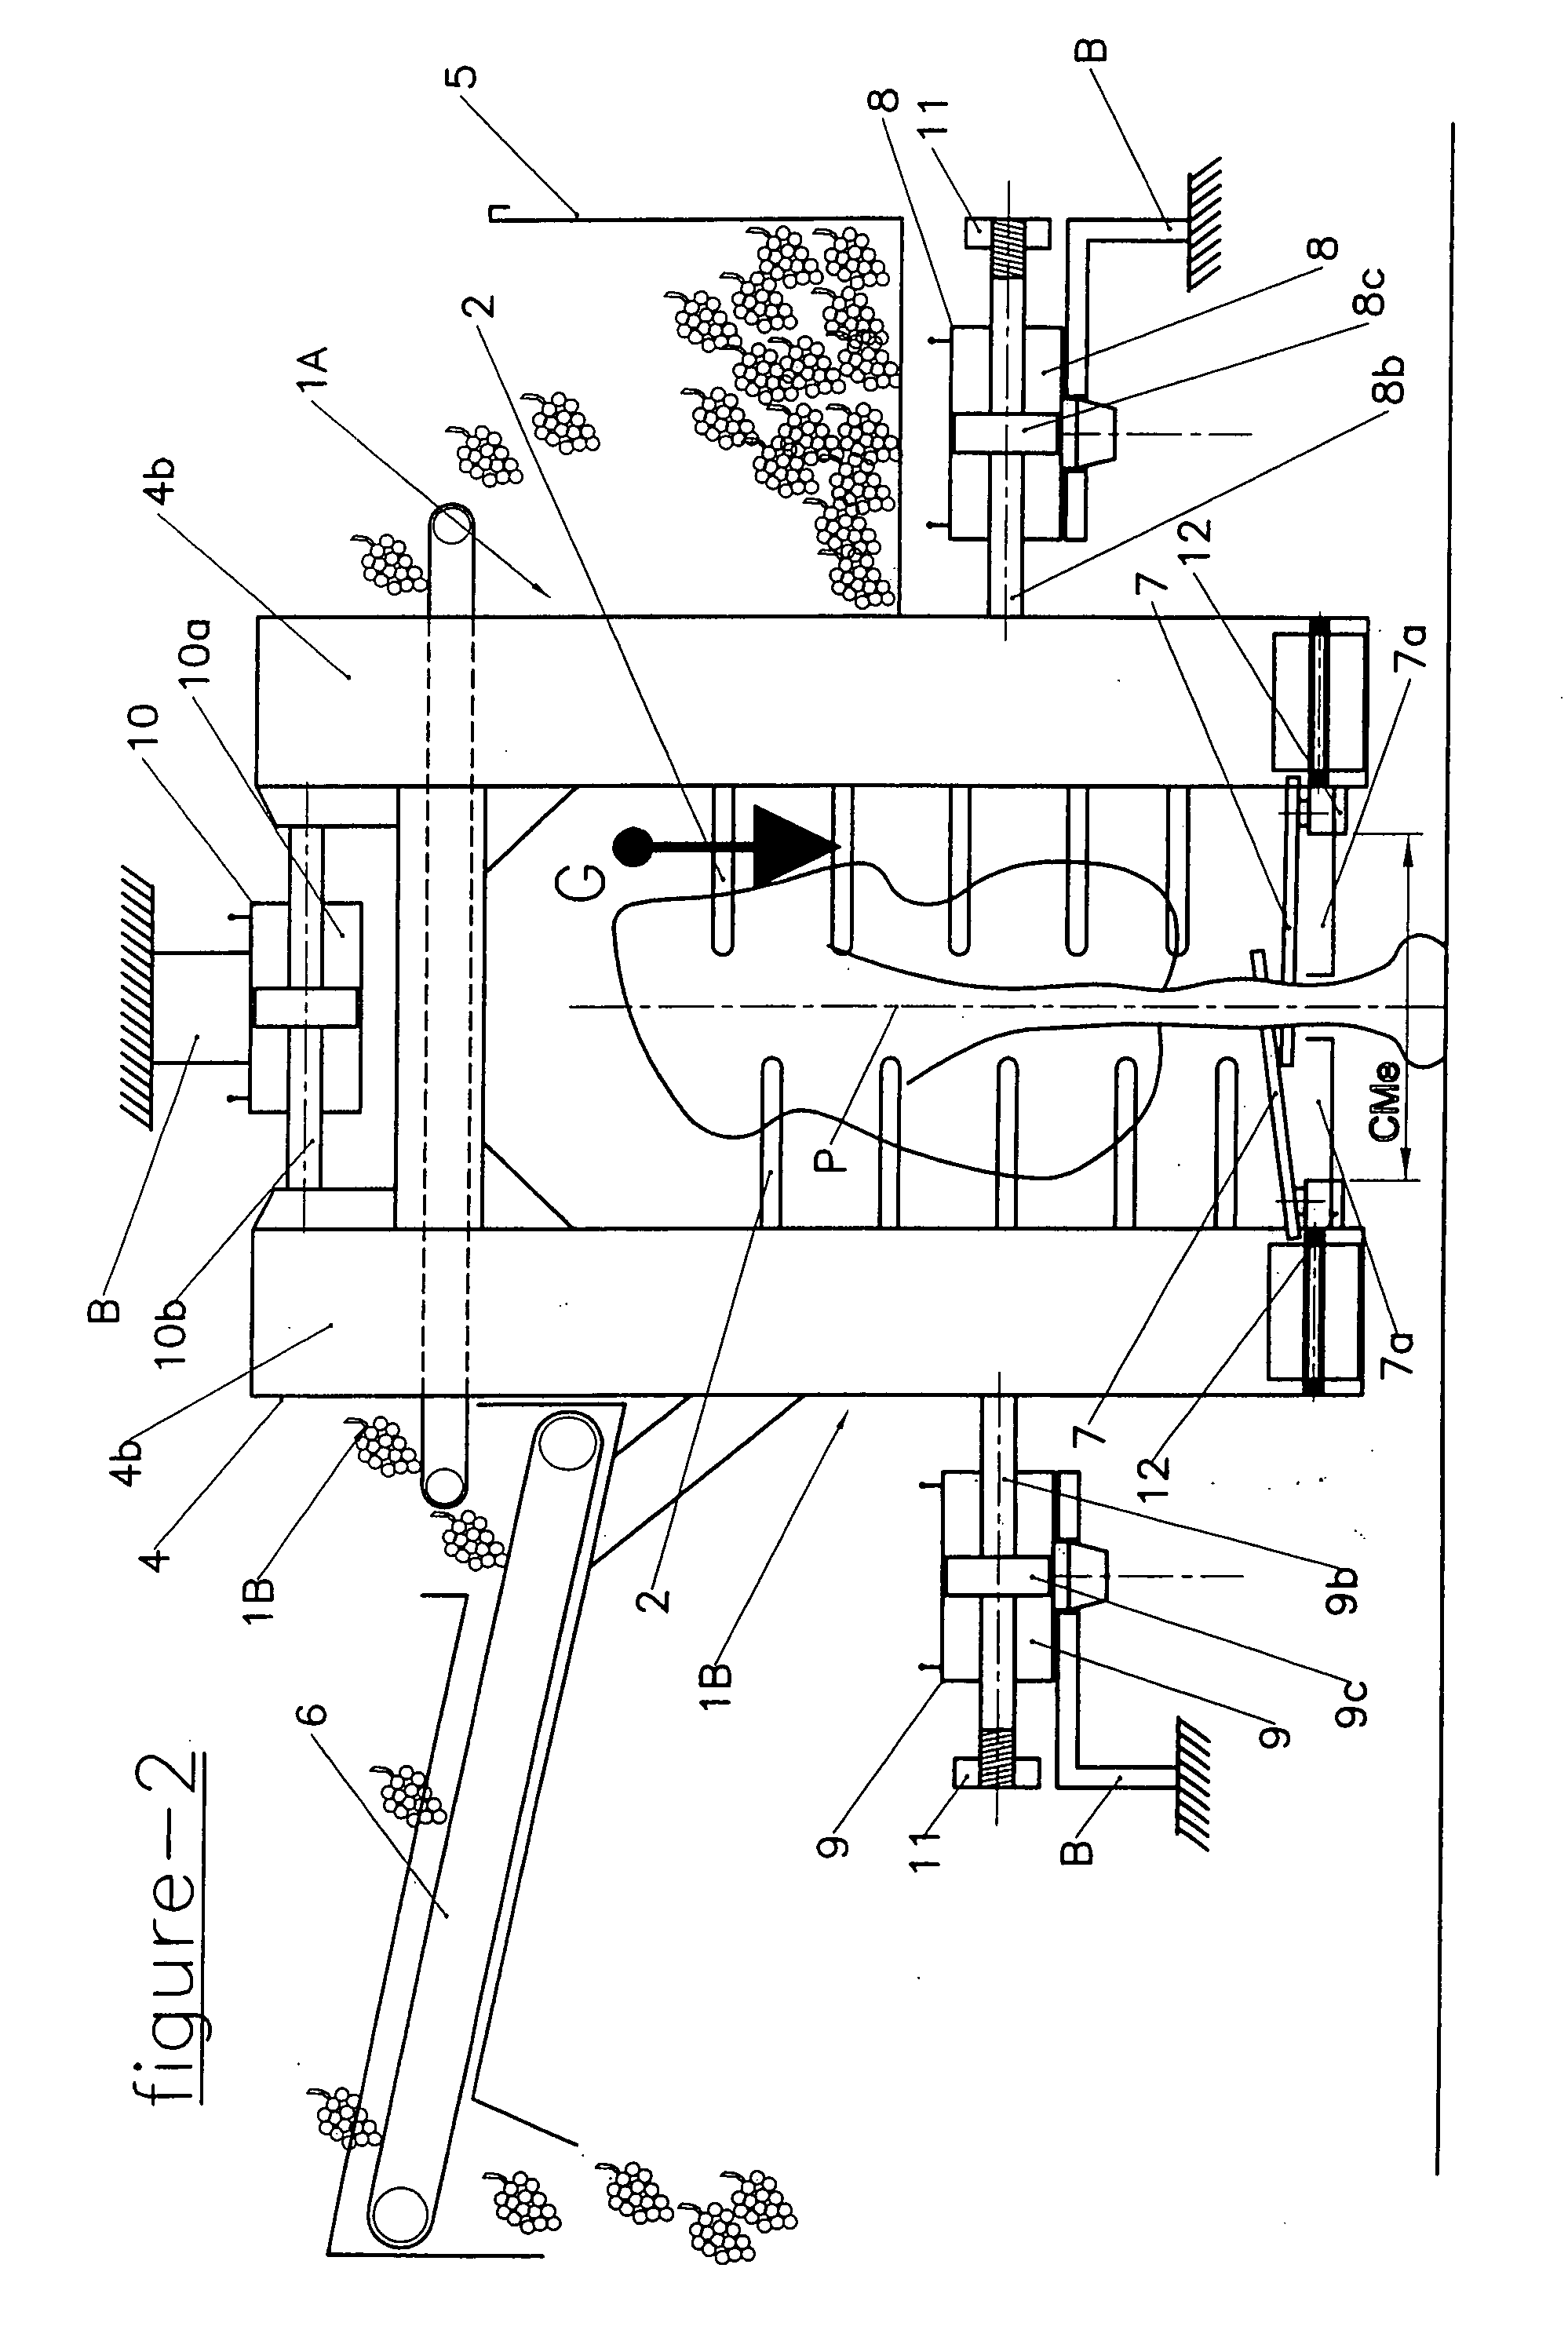 Self-centering straddling harvesting head for small fruit harvesting machine and machine equipped with such harvesting head